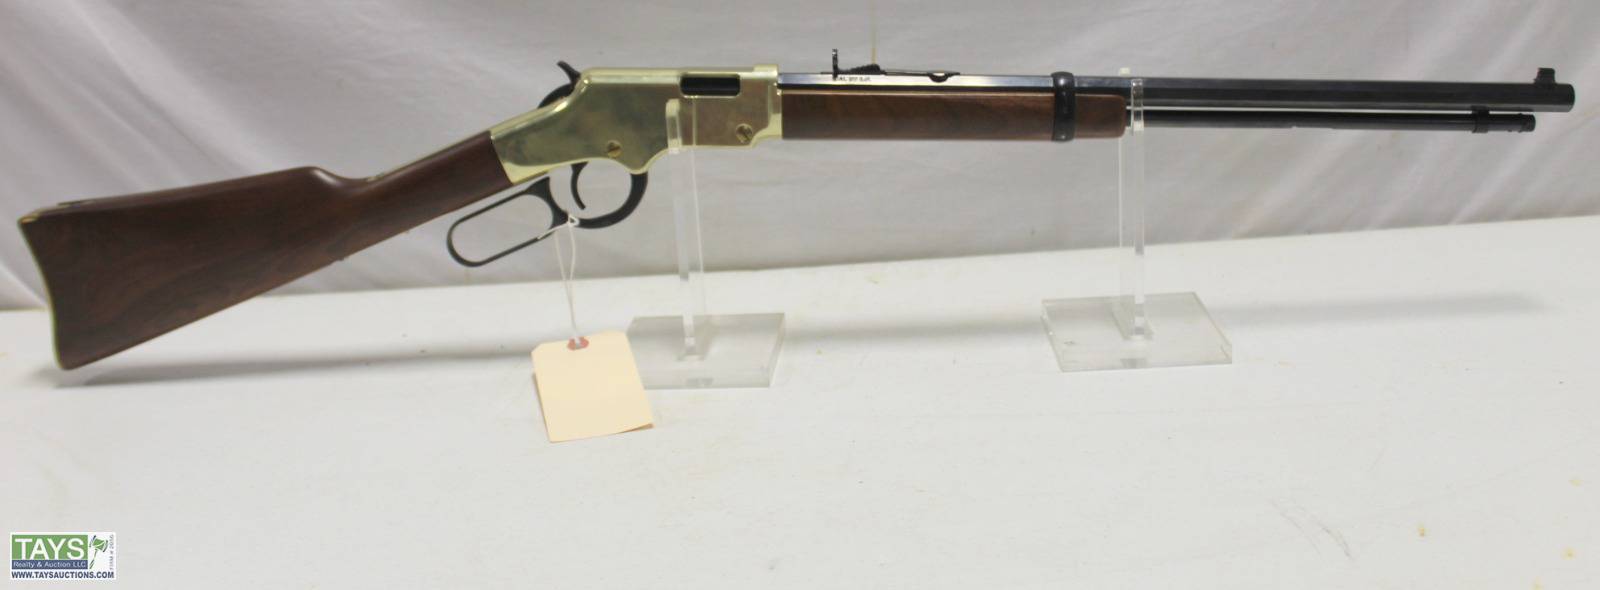 ONLINE ABSOLUTE AUCTION: 300± CONFISCATED FIREARMS FROM PUTNAM COUNTY SHERIFF'S OFFICE & 15TH JUDICIAL DISTRICT DRUG TASK FORCE